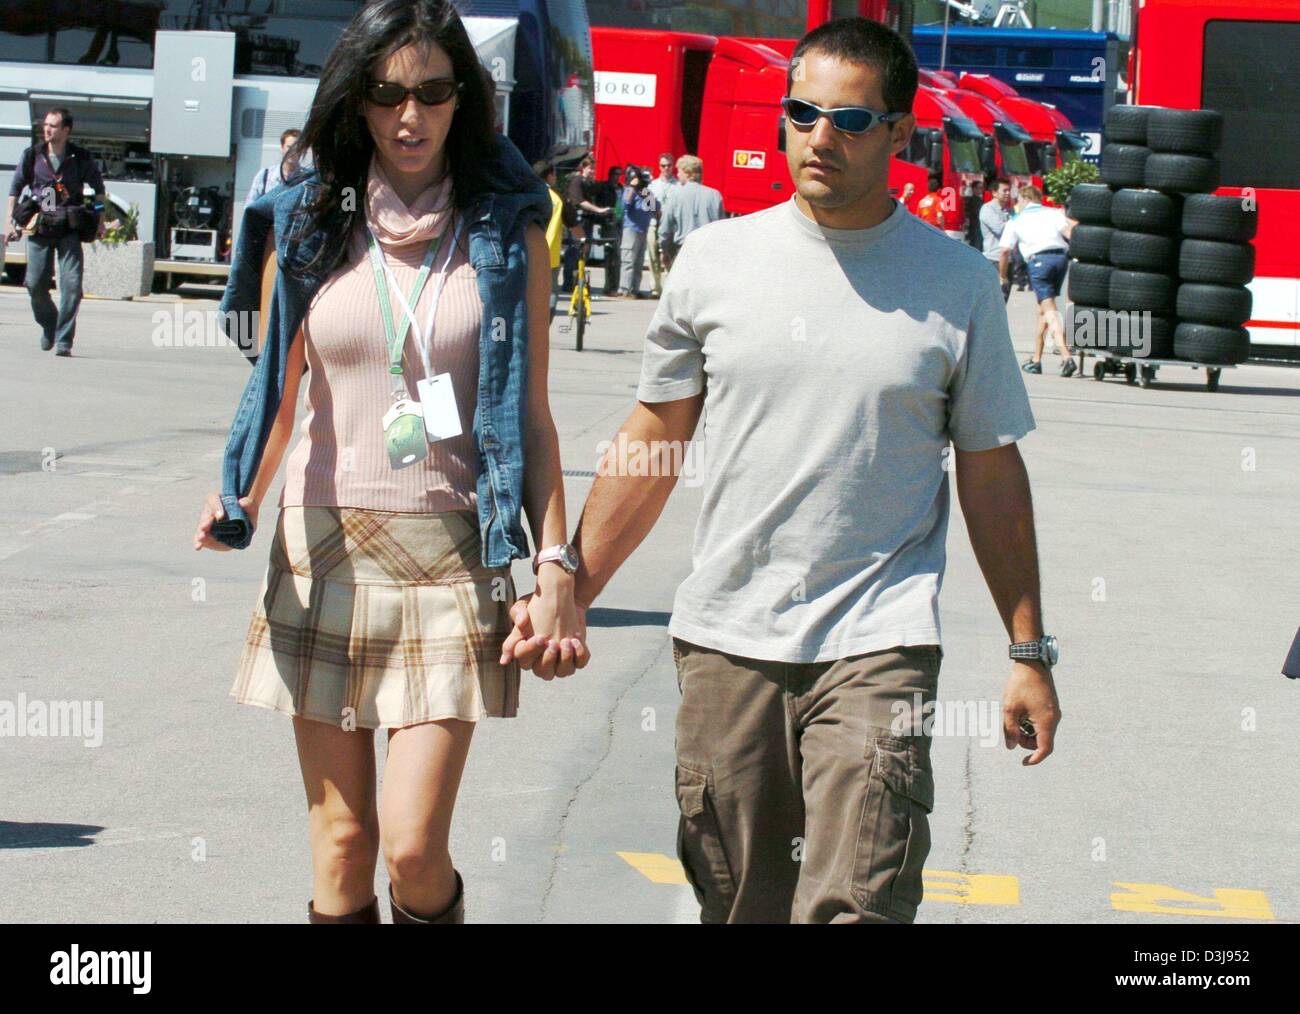 (dpa) - Columbian race car driver Juan Pablo Montoya (Team BMW-Williams) and his wife Connie (L) arrive at the race track 'Enzo e Dino Ferrari' in Imola, Italy, on Thursday 22 April 2004. The first European race of the F1 season will take place in Imola with the San Marino Grand Prix this coming Sunday. Stock Photo